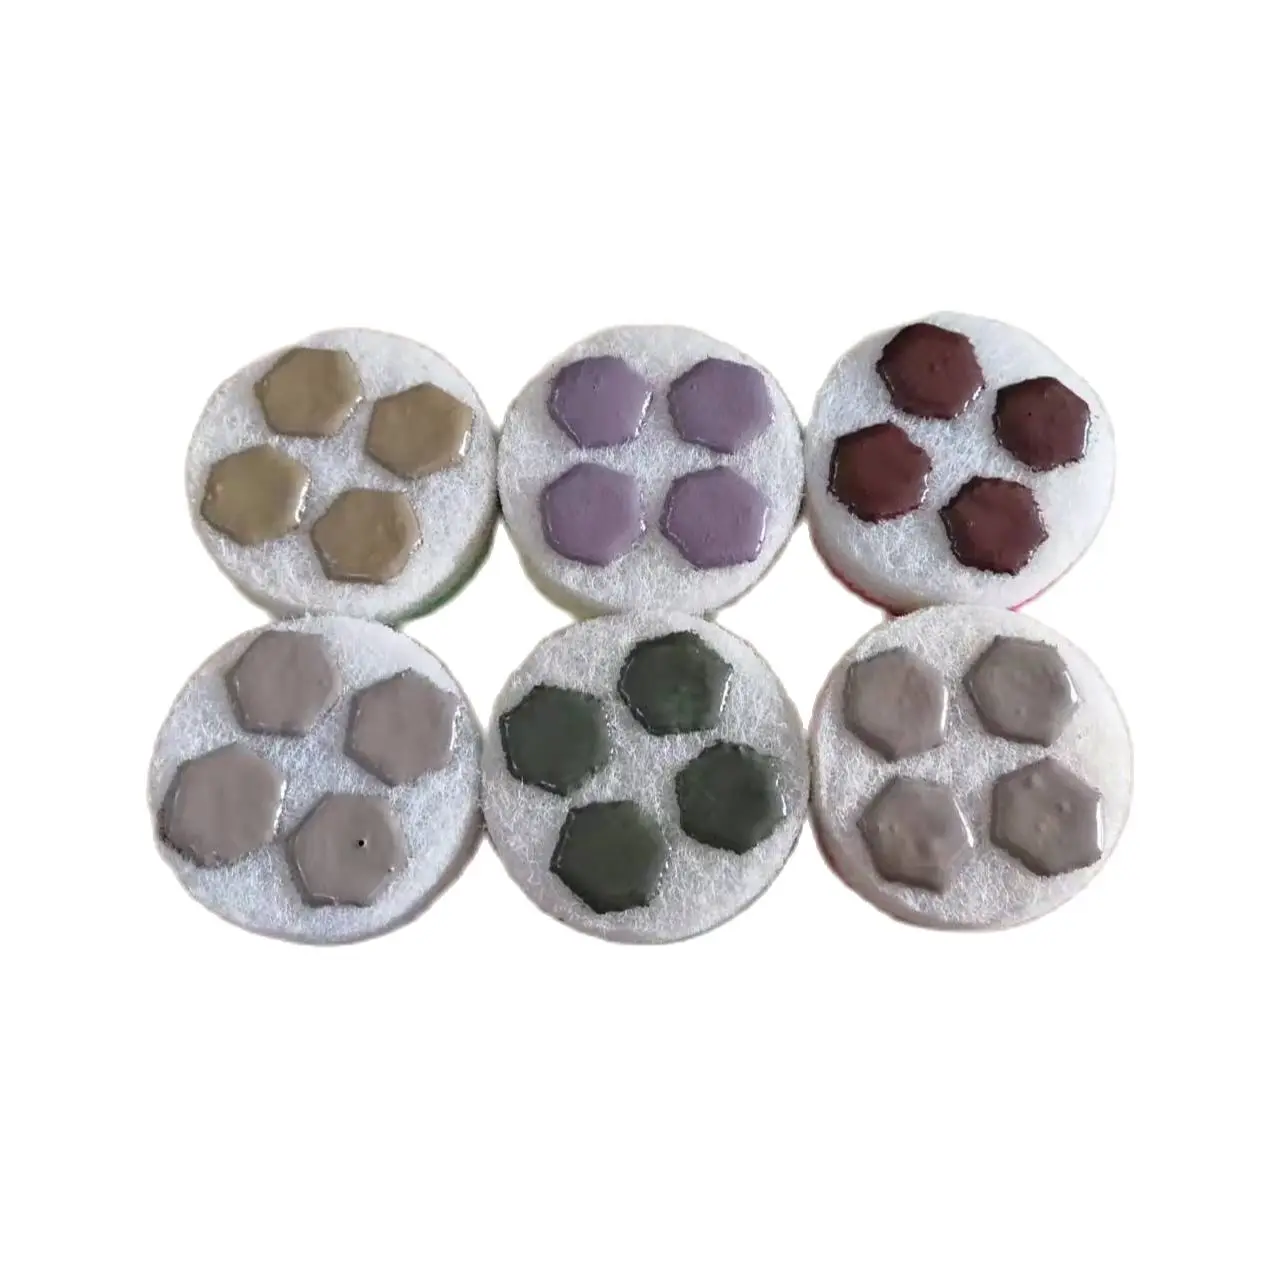 6 Pieces 3 Inch 80mm Abrasive Diamond Floor Polishing Pad For Floor Grinding Renewing Processing Marble Granite Concrete Stone